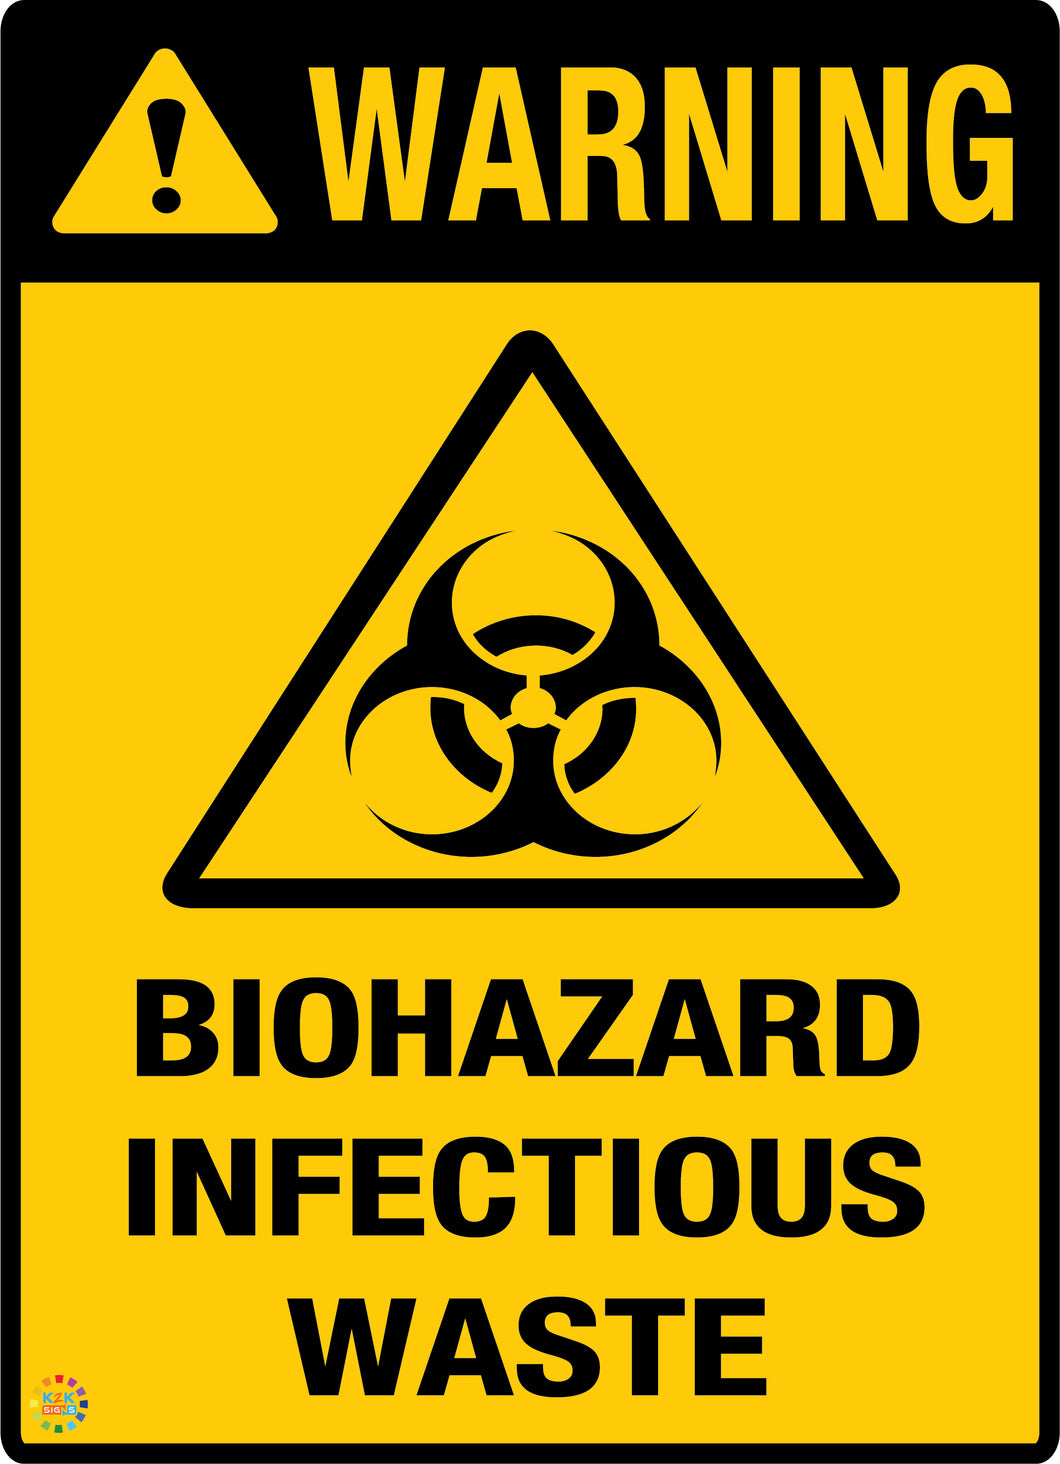 Warning - Biohazard Infectious Waste Sign